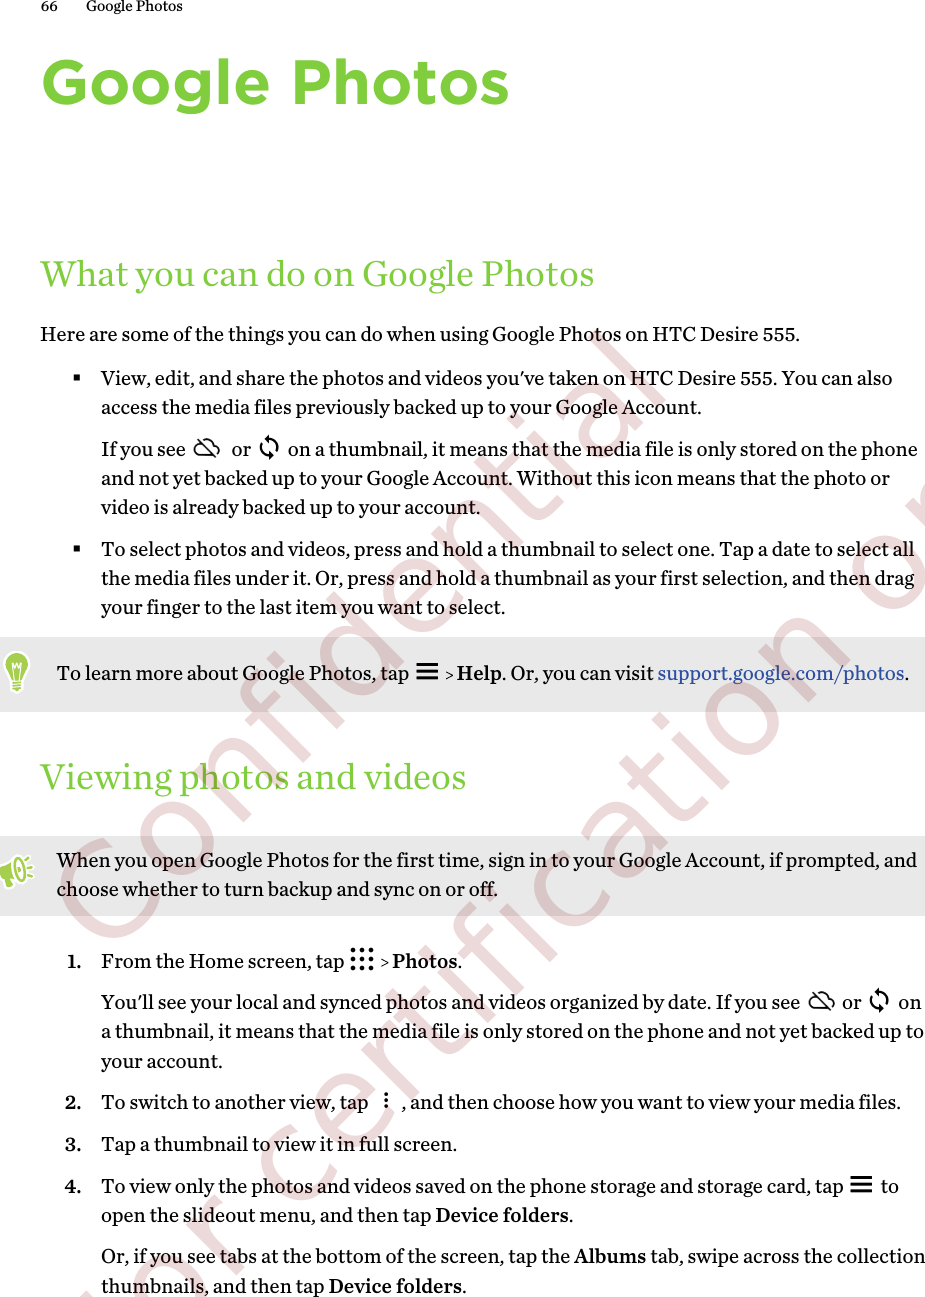 Google PhotosWhat you can do on Google PhotosHere are some of the things you can do when using Google Photos on HTC Desire 555.§View, edit, and share the photos and videos you&apos;ve taken on HTC Desire 555. You can alsoaccess the media files previously backed up to your Google Account.If you see   or   on a thumbnail, it means that the media file is only stored on the phoneand not yet backed up to your Google Account. Without this icon means that the photo orvideo is already backed up to your account.§To select photos and videos, press and hold a thumbnail to select one. Tap a date to select allthe media files under it. Or, press and hold a thumbnail as your first selection, and then dragyour finger to the last item you want to select.To learn more about Google Photos, tap     Help. Or, you can visit support.google.com/photos.Viewing photos and videosWhen you open Google Photos for the first time, sign in to your Google Account, if prompted, andchoose whether to turn backup and sync on or off.1. From the Home screen, tap     Photos. You&apos;ll see your local and synced photos and videos organized by date. If you see  or   ona thumbnail, it means that the media file is only stored on the phone and not yet backed up toyour account.2. To switch to another view, tap  , and then choose how you want to view your media files.3. Tap a thumbnail to view it in full screen.4. To view only the photos and videos saved on the phone storage and storage card, tap   toopen the slideout menu, and then tap Device folders.Or, if you see tabs at the bottom of the screen, tap the Albums tab, swipe across the collectionthumbnails, and then tap Device folders.66 Google Photos        Confidential  For certification only